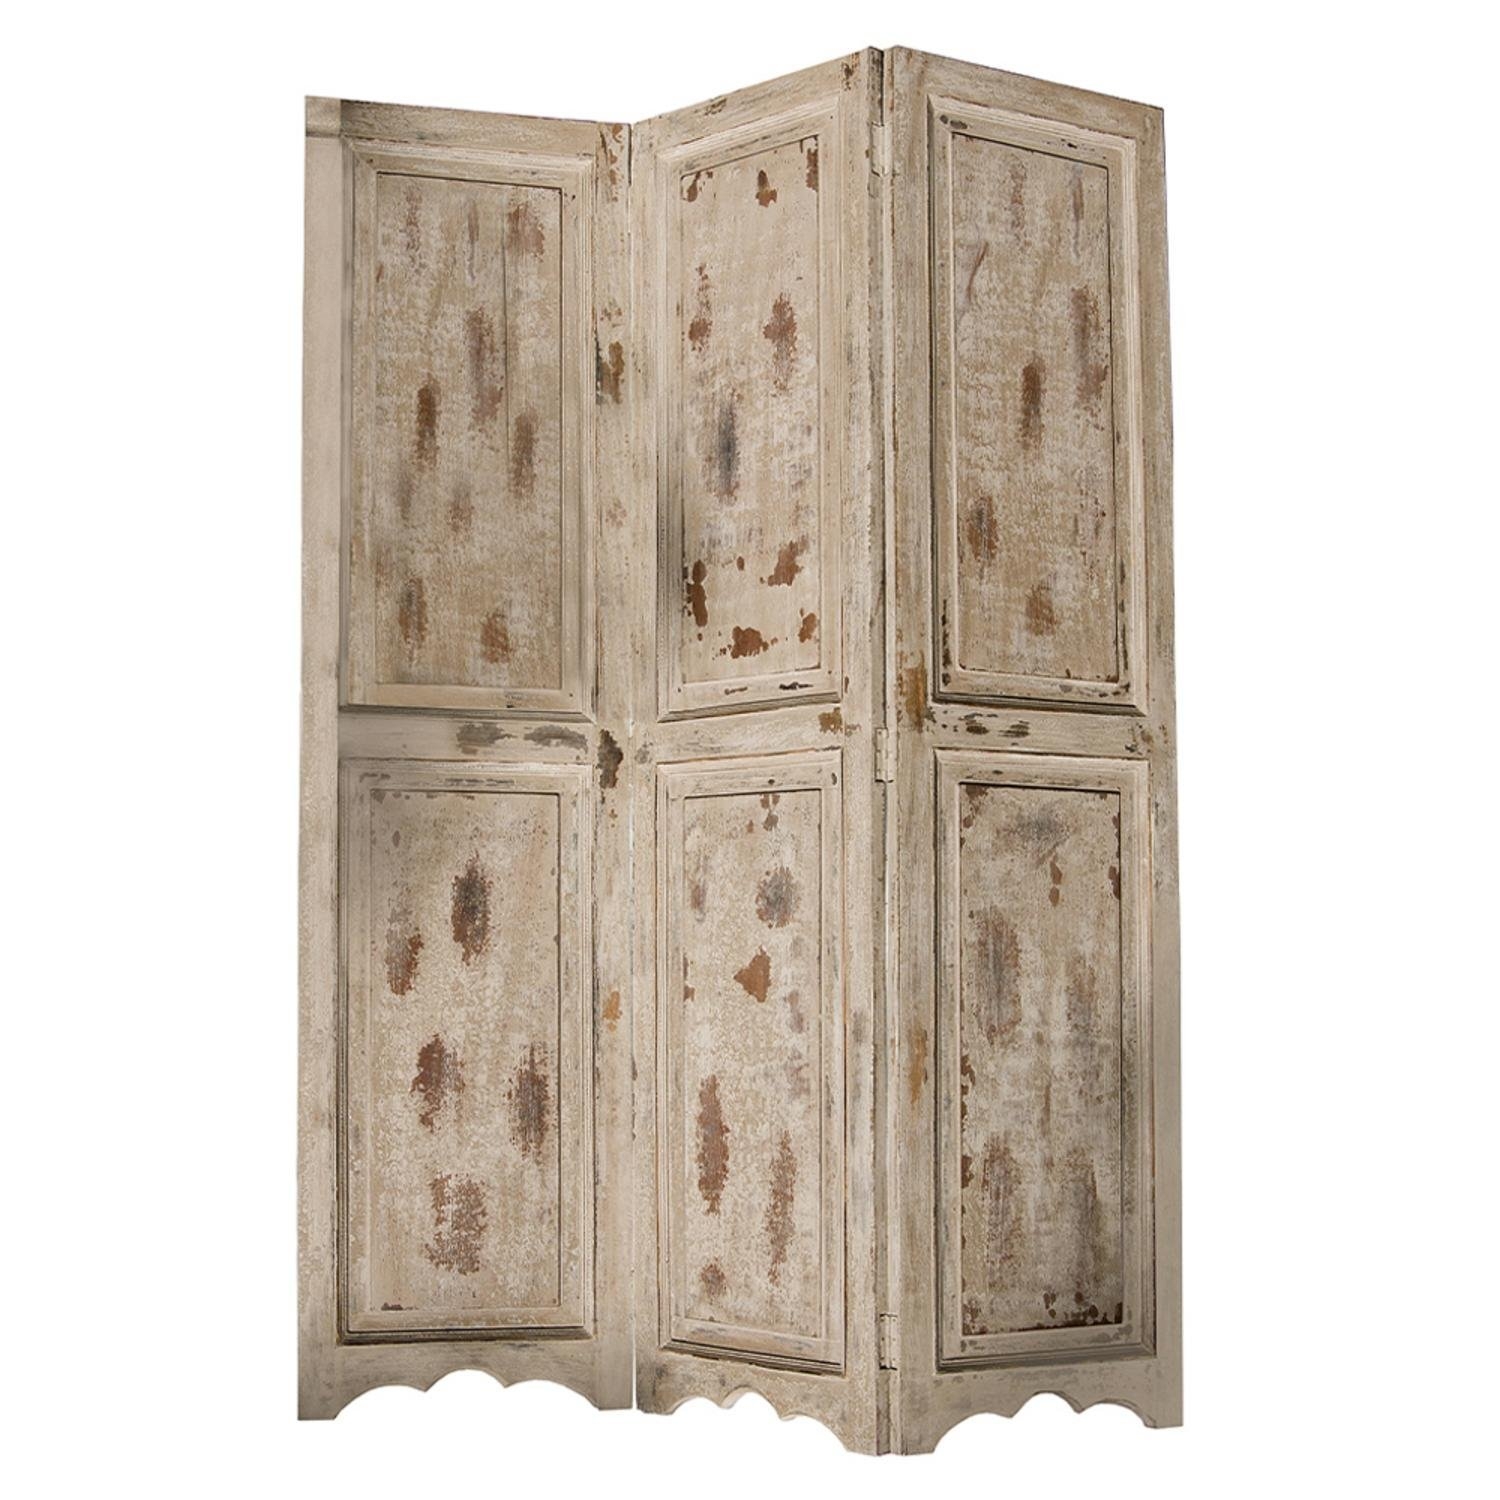 Room divider decoration with three panel door solid wood room